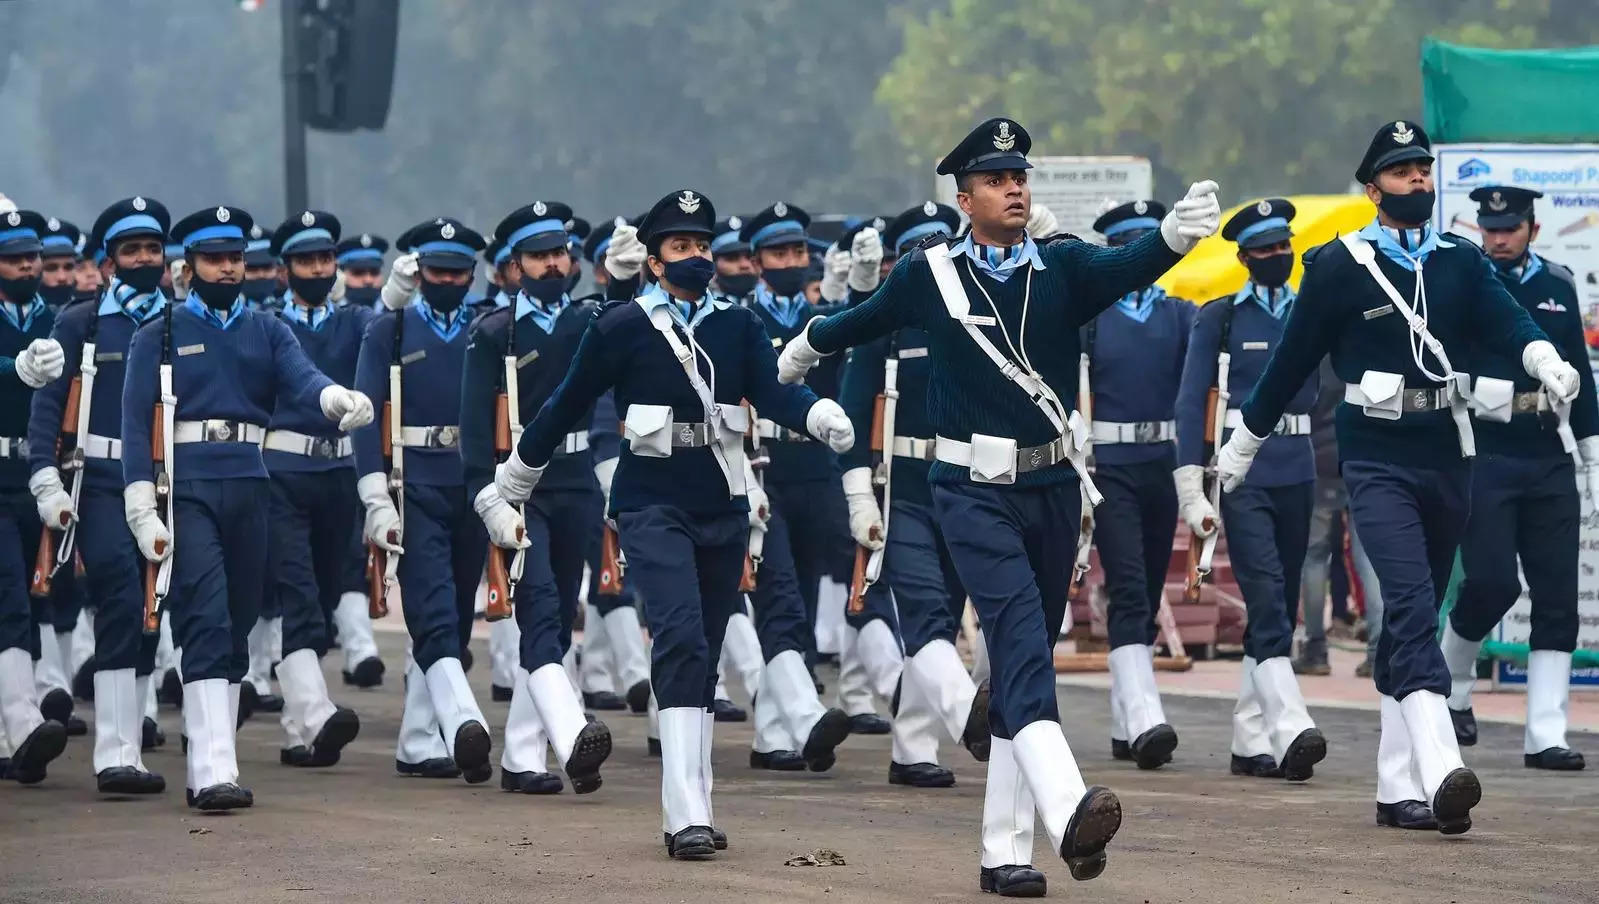 Photos of rehearsals for Republic Day parade at Rajpath in Delhi. The Times of India